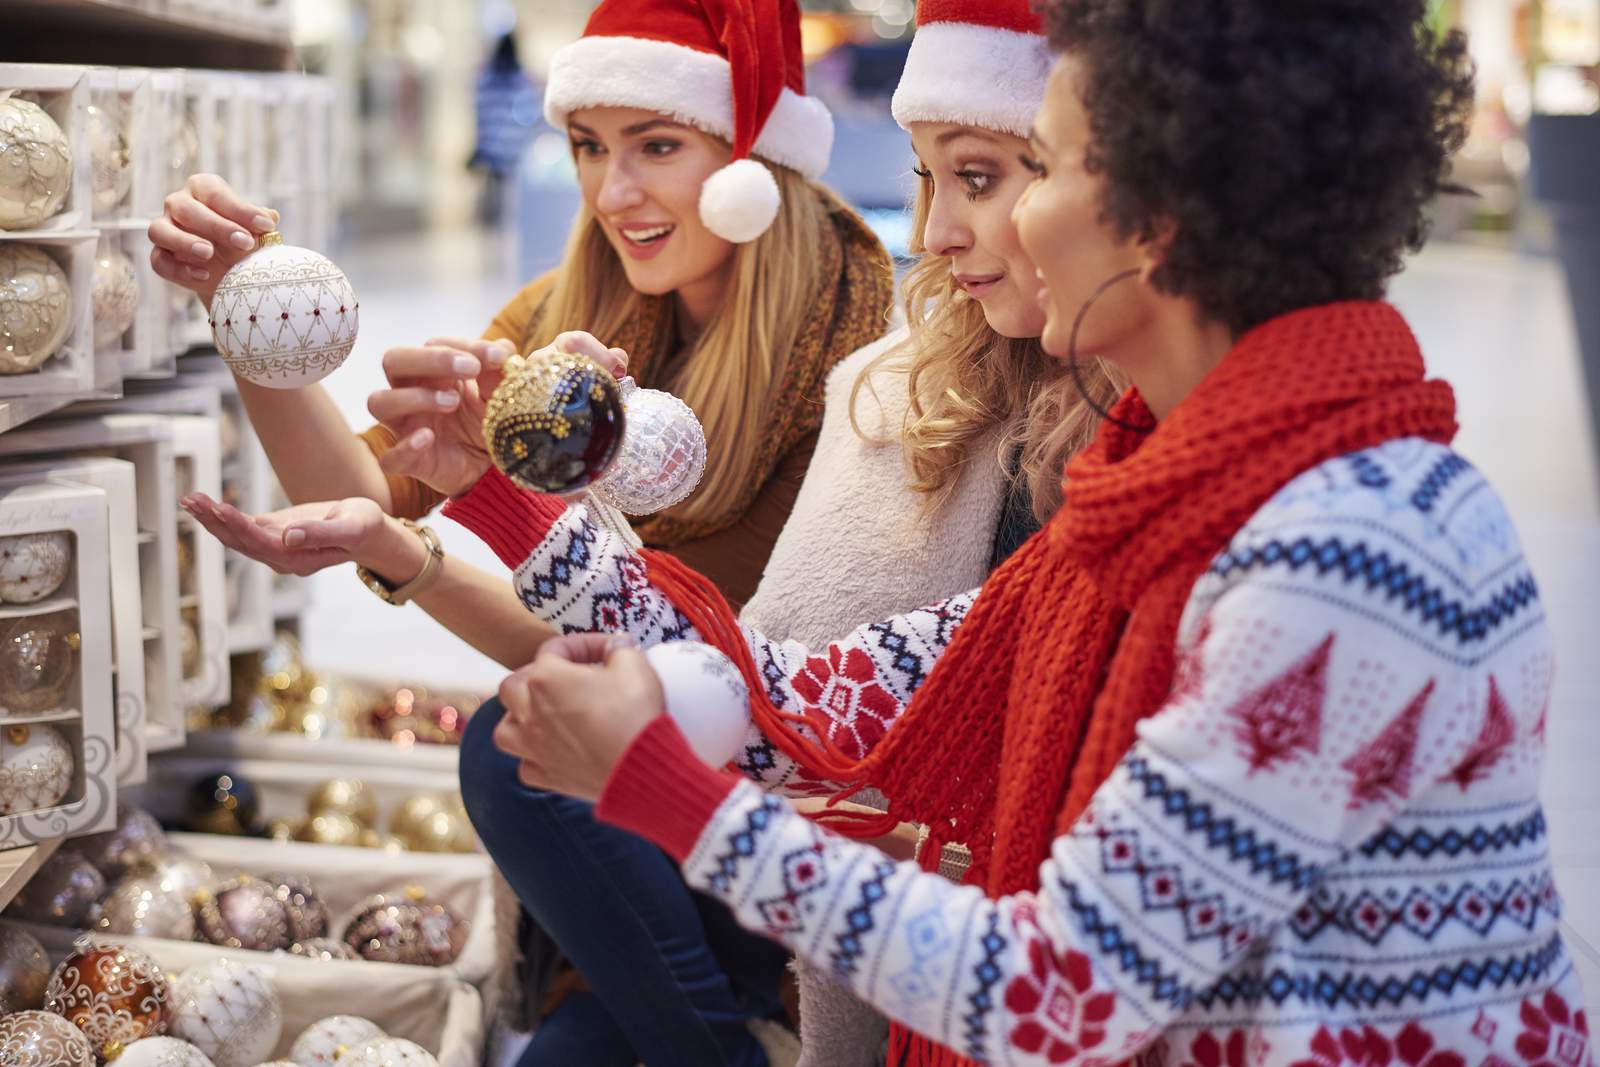 LIST: Here are Houston-area holiday markets perfect for Christmas shopping